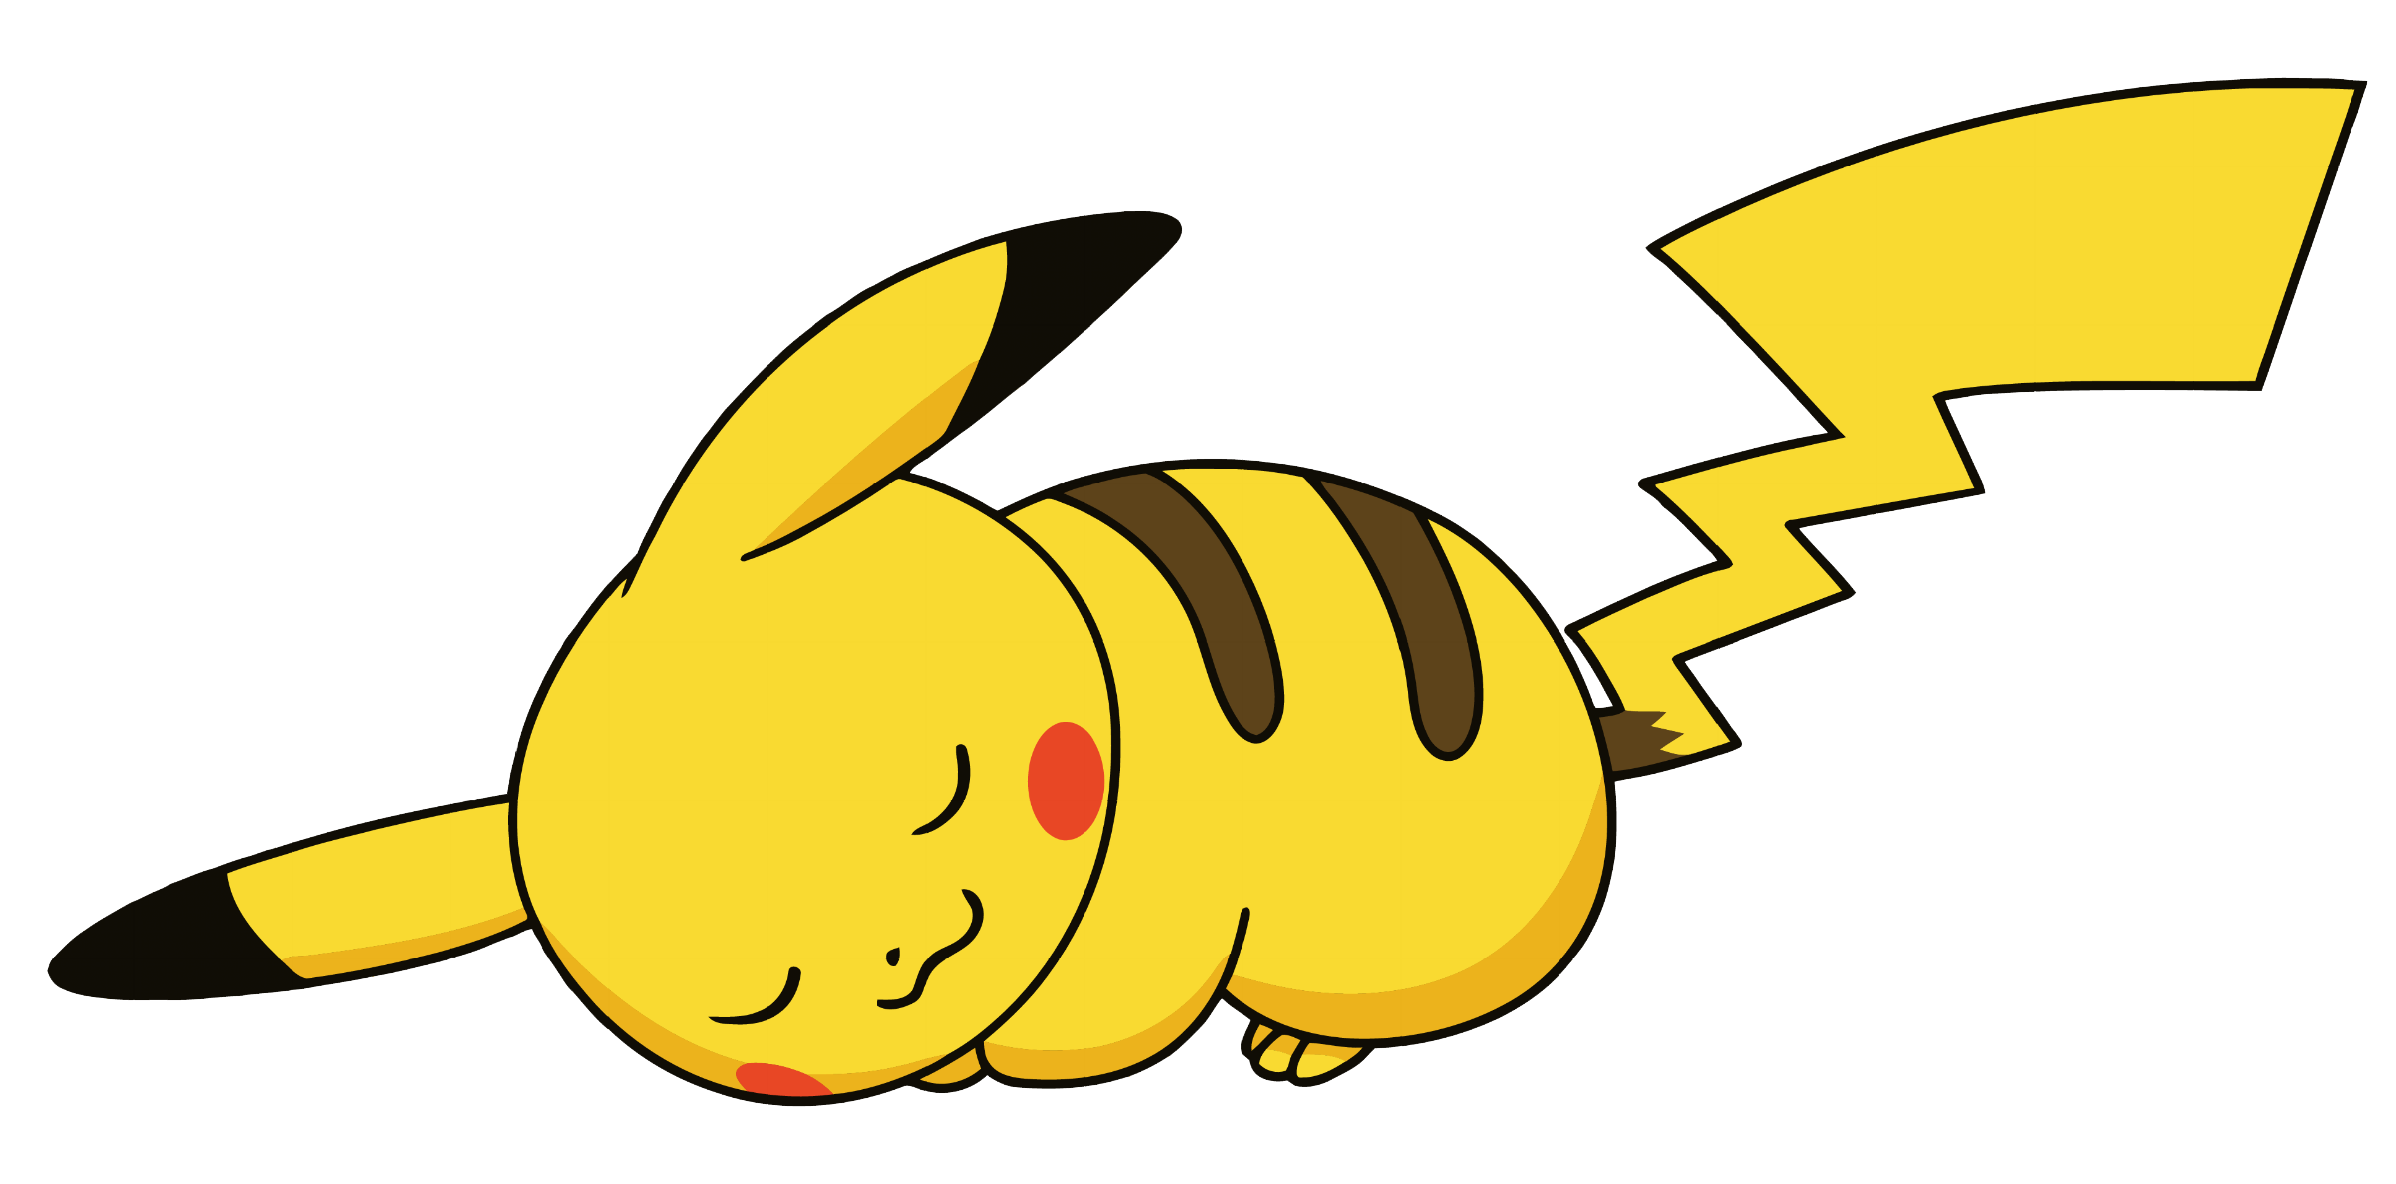 Clipart sleeping pikachu. So cute and adorable